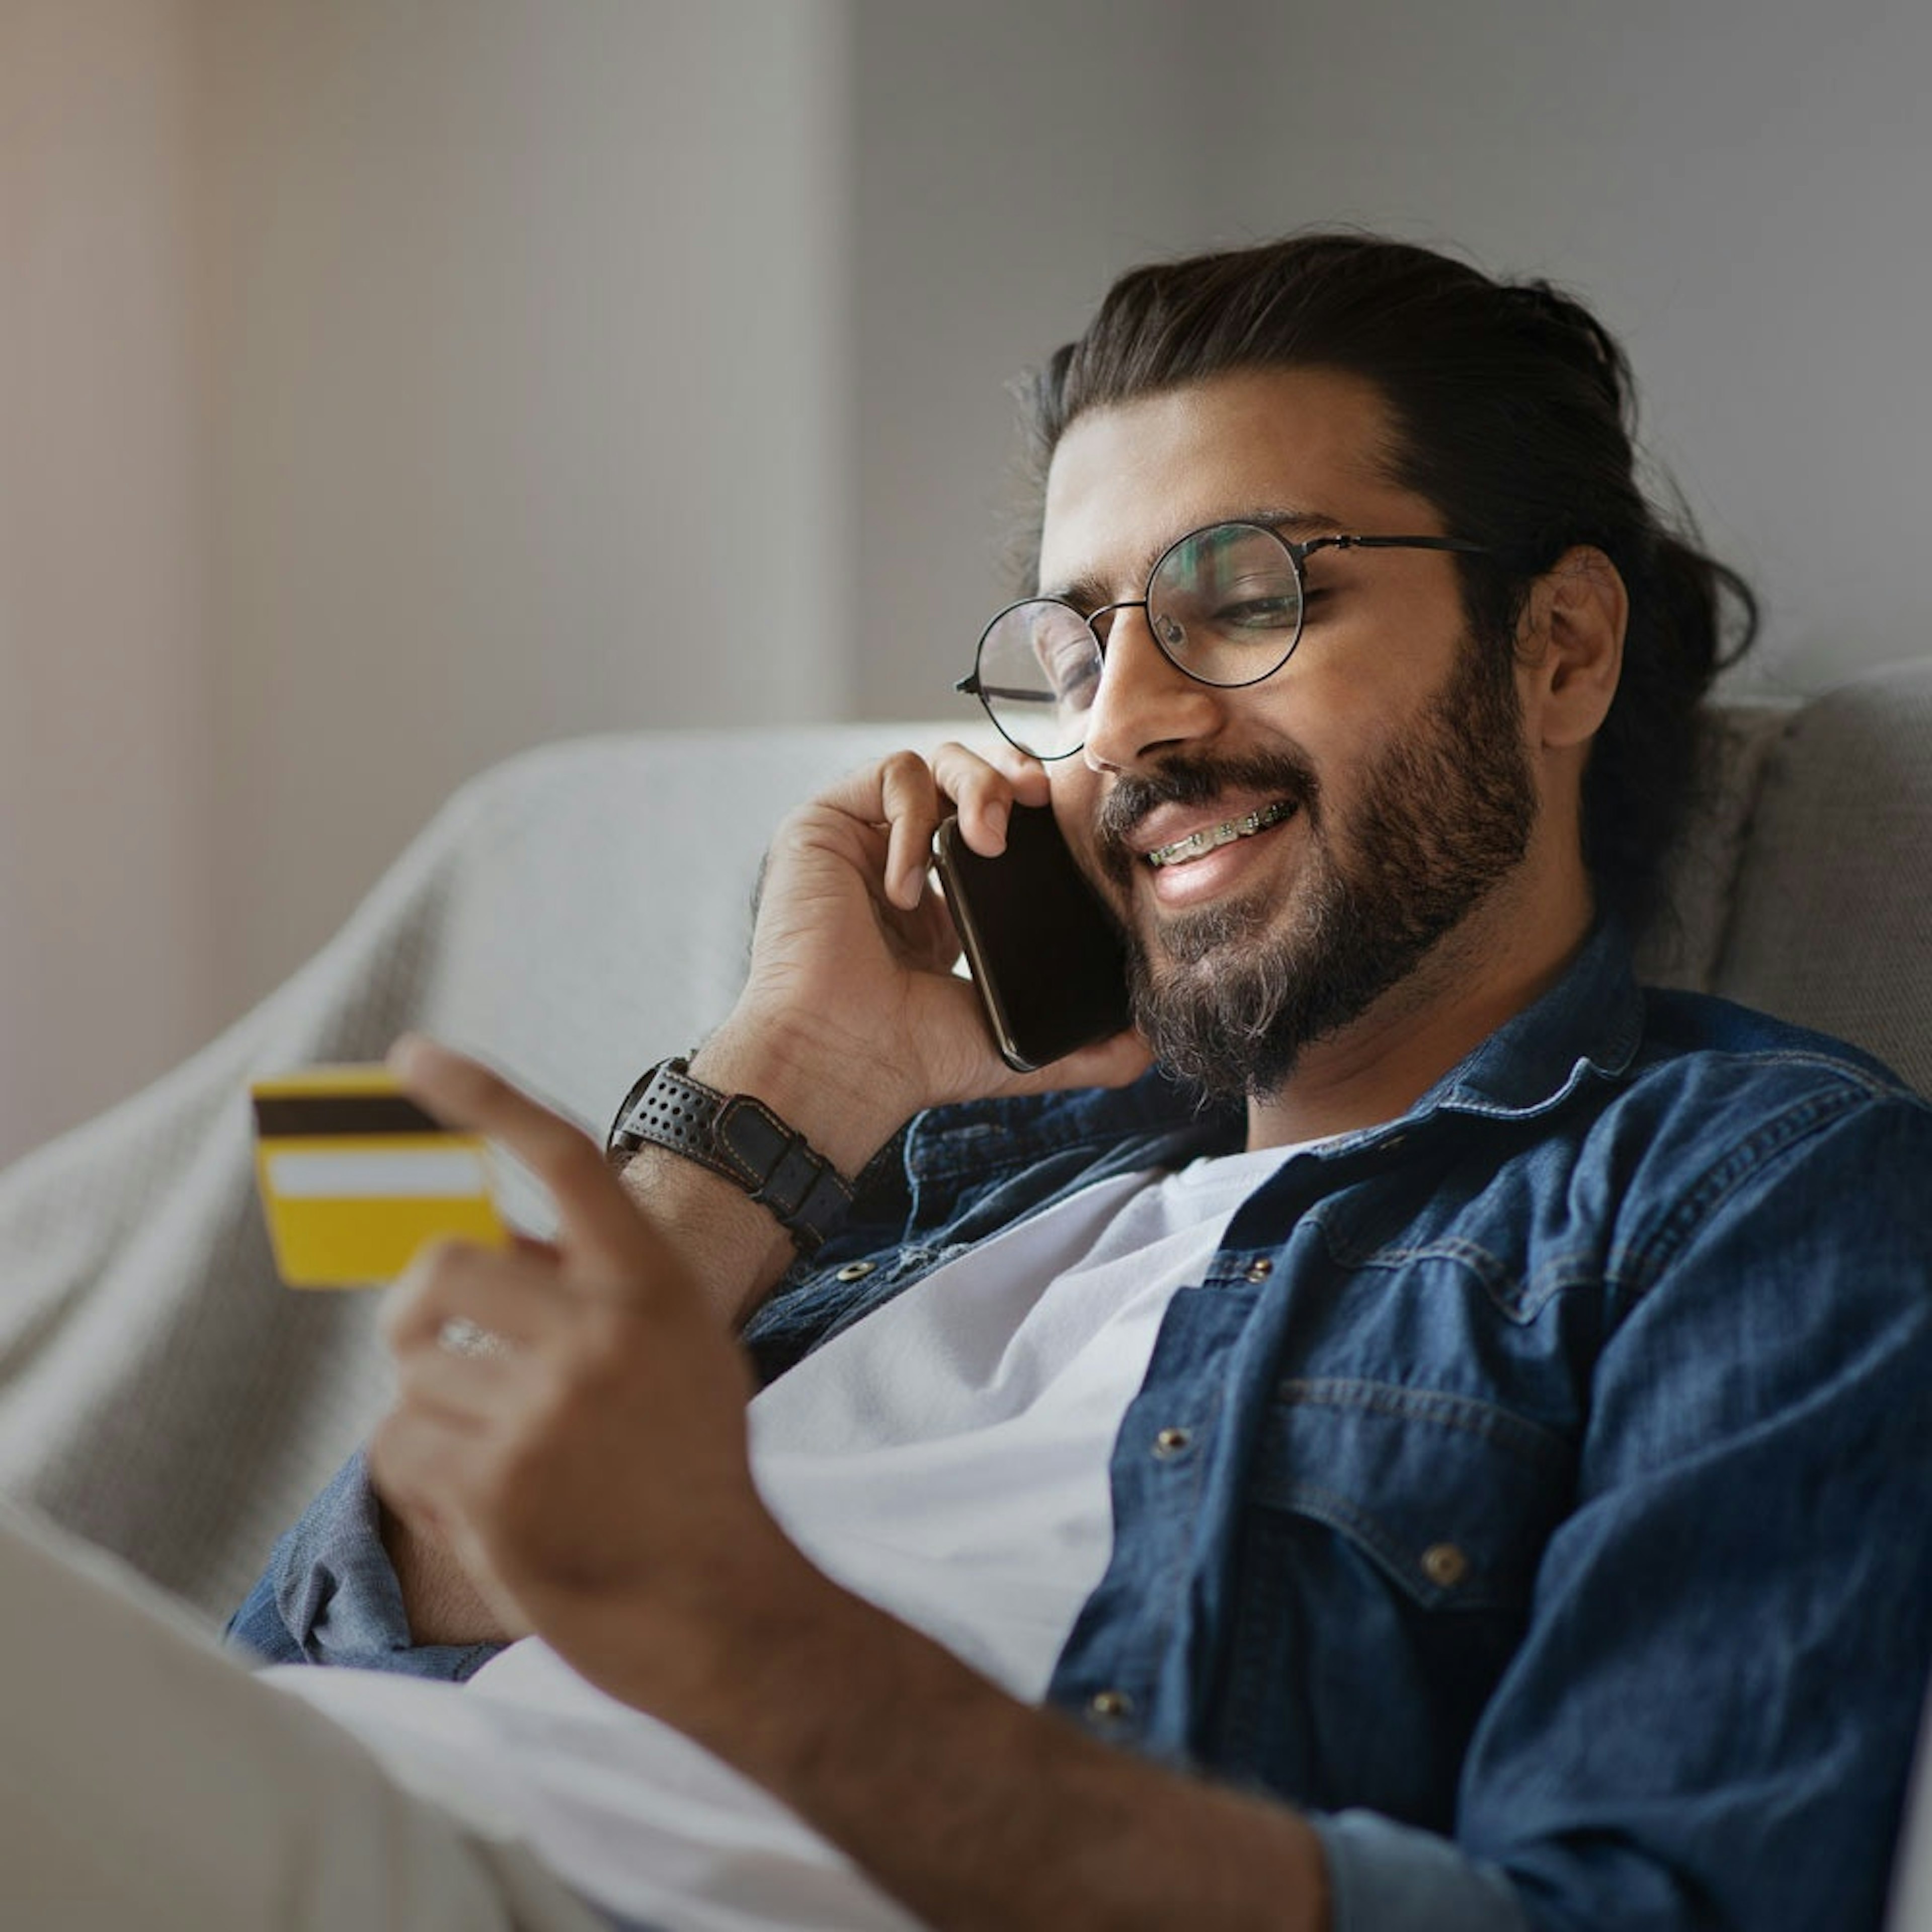 Smiling man wearing braces on the phone holding credit card